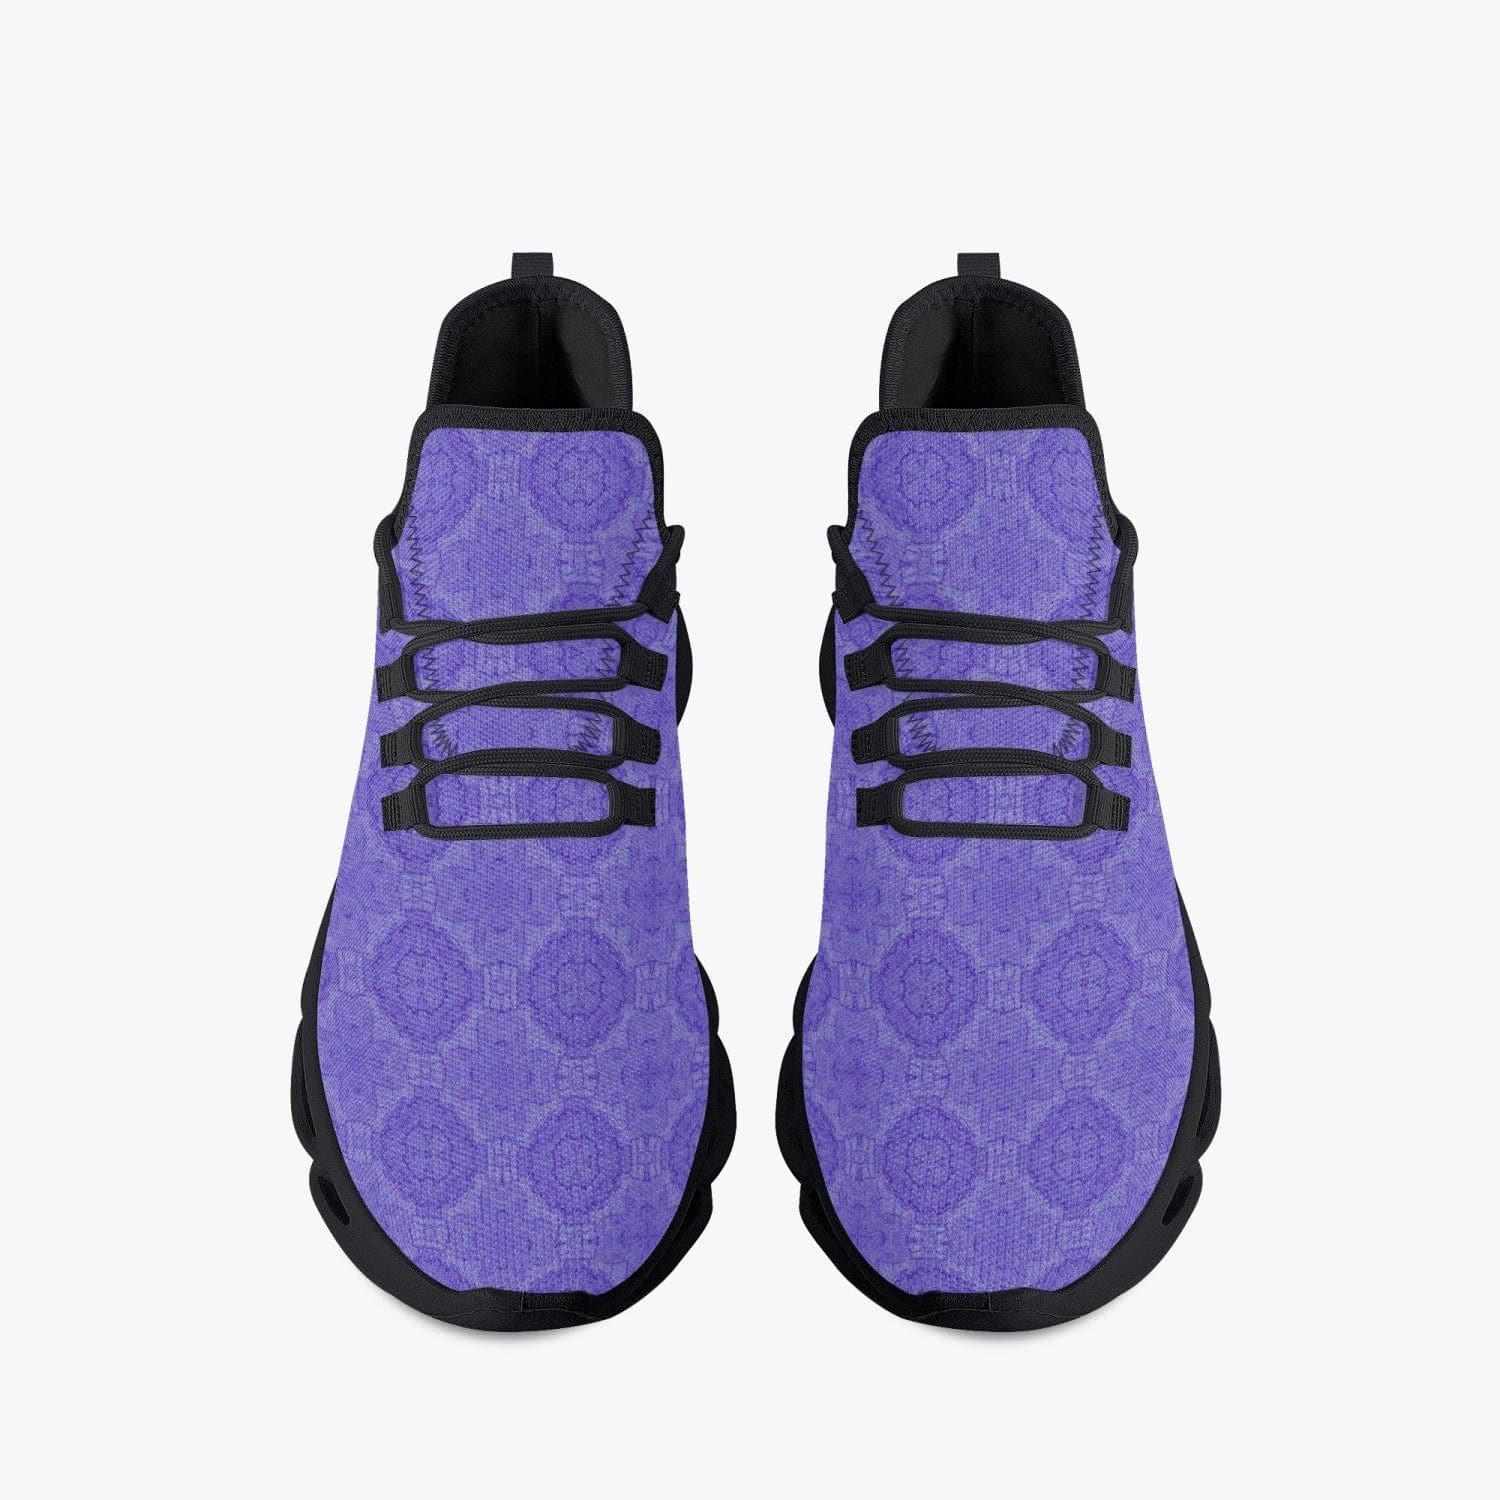 Purple Durable Springy Bounce Laced Mesh Soft Knit Sneakers for Men and Women with Soft Linen Interior